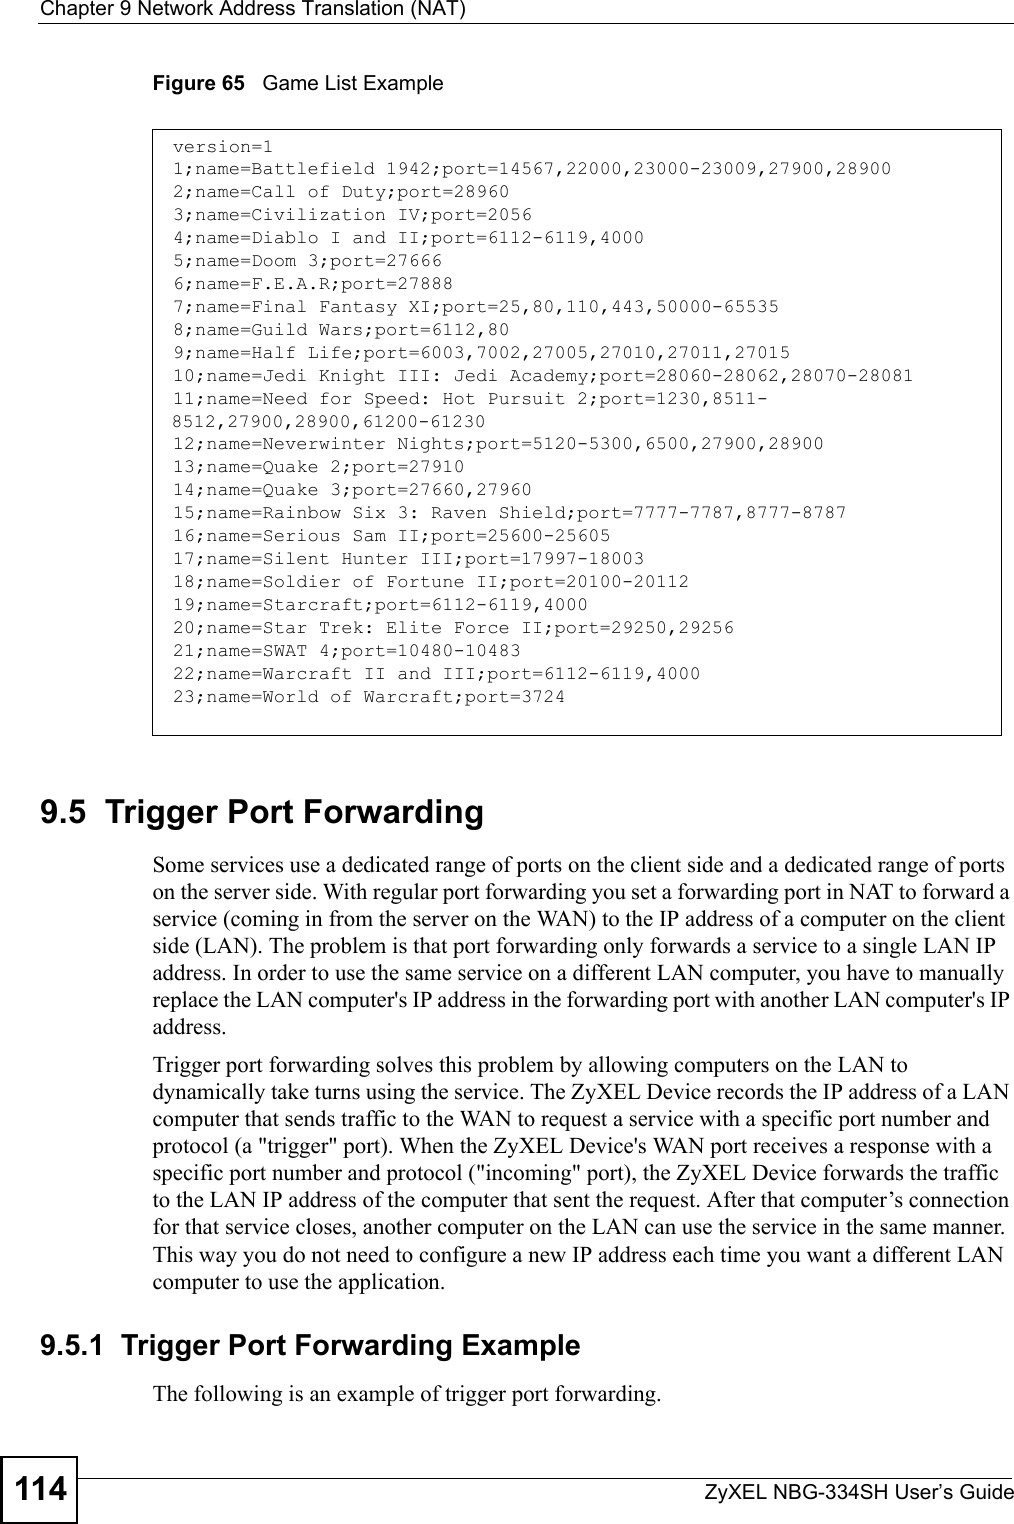 Chapter 9 Network Address Translation (NAT)ZyXEL NBG-334SH User’s Guide114Figure 65   Game List Example9.5  Trigger Port Forwarding  Some services use a dedicated range of ports on the client side and a dedicated range of ports on the server side. With regular port forwarding you set a forwarding port in NAT to forward a service (coming in from the server on the WAN) to the IP address of a computer on the client side (LAN). The problem is that port forwarding only forwards a service to a single LAN IP address. In order to use the same service on a different LAN computer, you have to manually replace the LAN computer&apos;s IP address in the forwarding port with another LAN computer&apos;s IP address. Trigger port forwarding solves this problem by allowing computers on the LAN to dynamically take turns using the service. The ZyXEL Device records the IP address of a LAN computer that sends traffic to the WAN to request a service with a specific port number and protocol (a &quot;trigger&quot; port). When the ZyXEL Device&apos;s WAN port receives a response with a specific port number and protocol (&quot;incoming&quot; port), the ZyXEL Device forwards the traffic to the LAN IP address of the computer that sent the request. After that computer’s connection for that service closes, another computer on the LAN can use the service in the same manner. This way you do not need to configure a new IP address each time you want a different LAN computer to use the application.9.5.1  Trigger Port Forwarding Example  The following is an example of trigger port forwarding.version=11;name=Battlefield 1942;port=14567,22000,23000-23009,27900,289002;name=Call of Duty;port=289603;name=Civilization IV;port=20564;name=Diablo I and II;port=6112-6119,40005;name=Doom 3;port=276666;name=F.E.A.R;port=278887;name=Final Fantasy XI;port=25,80,110,443,50000-655358;name=Guild Wars;port=6112,809;name=Half Life;port=6003,7002,27005,27010,27011,2701510;name=Jedi Knight III: Jedi Academy;port=28060-28062,28070-2808111;name=Need for Speed: Hot Pursuit 2;port=1230,8511-8512,27900,28900,61200-6123012;name=Neverwinter Nights;port=5120-5300,6500,27900,2890013;name=Quake 2;port=2791014;name=Quake 3;port=27660,2796015;name=Rainbow Six 3: Raven Shield;port=7777-7787,8777-878716;name=Serious Sam II;port=25600-2560517;name=Silent Hunter III;port=17997-1800318;name=Soldier of Fortune II;port=20100-2011219;name=Starcraft;port=6112-6119,400020;name=Star Trek: Elite Force II;port=29250,2925621;name=SWAT 4;port=10480-1048322;name=Warcraft II and III;port=6112-6119,400023;name=World of Warcraft;port=3724